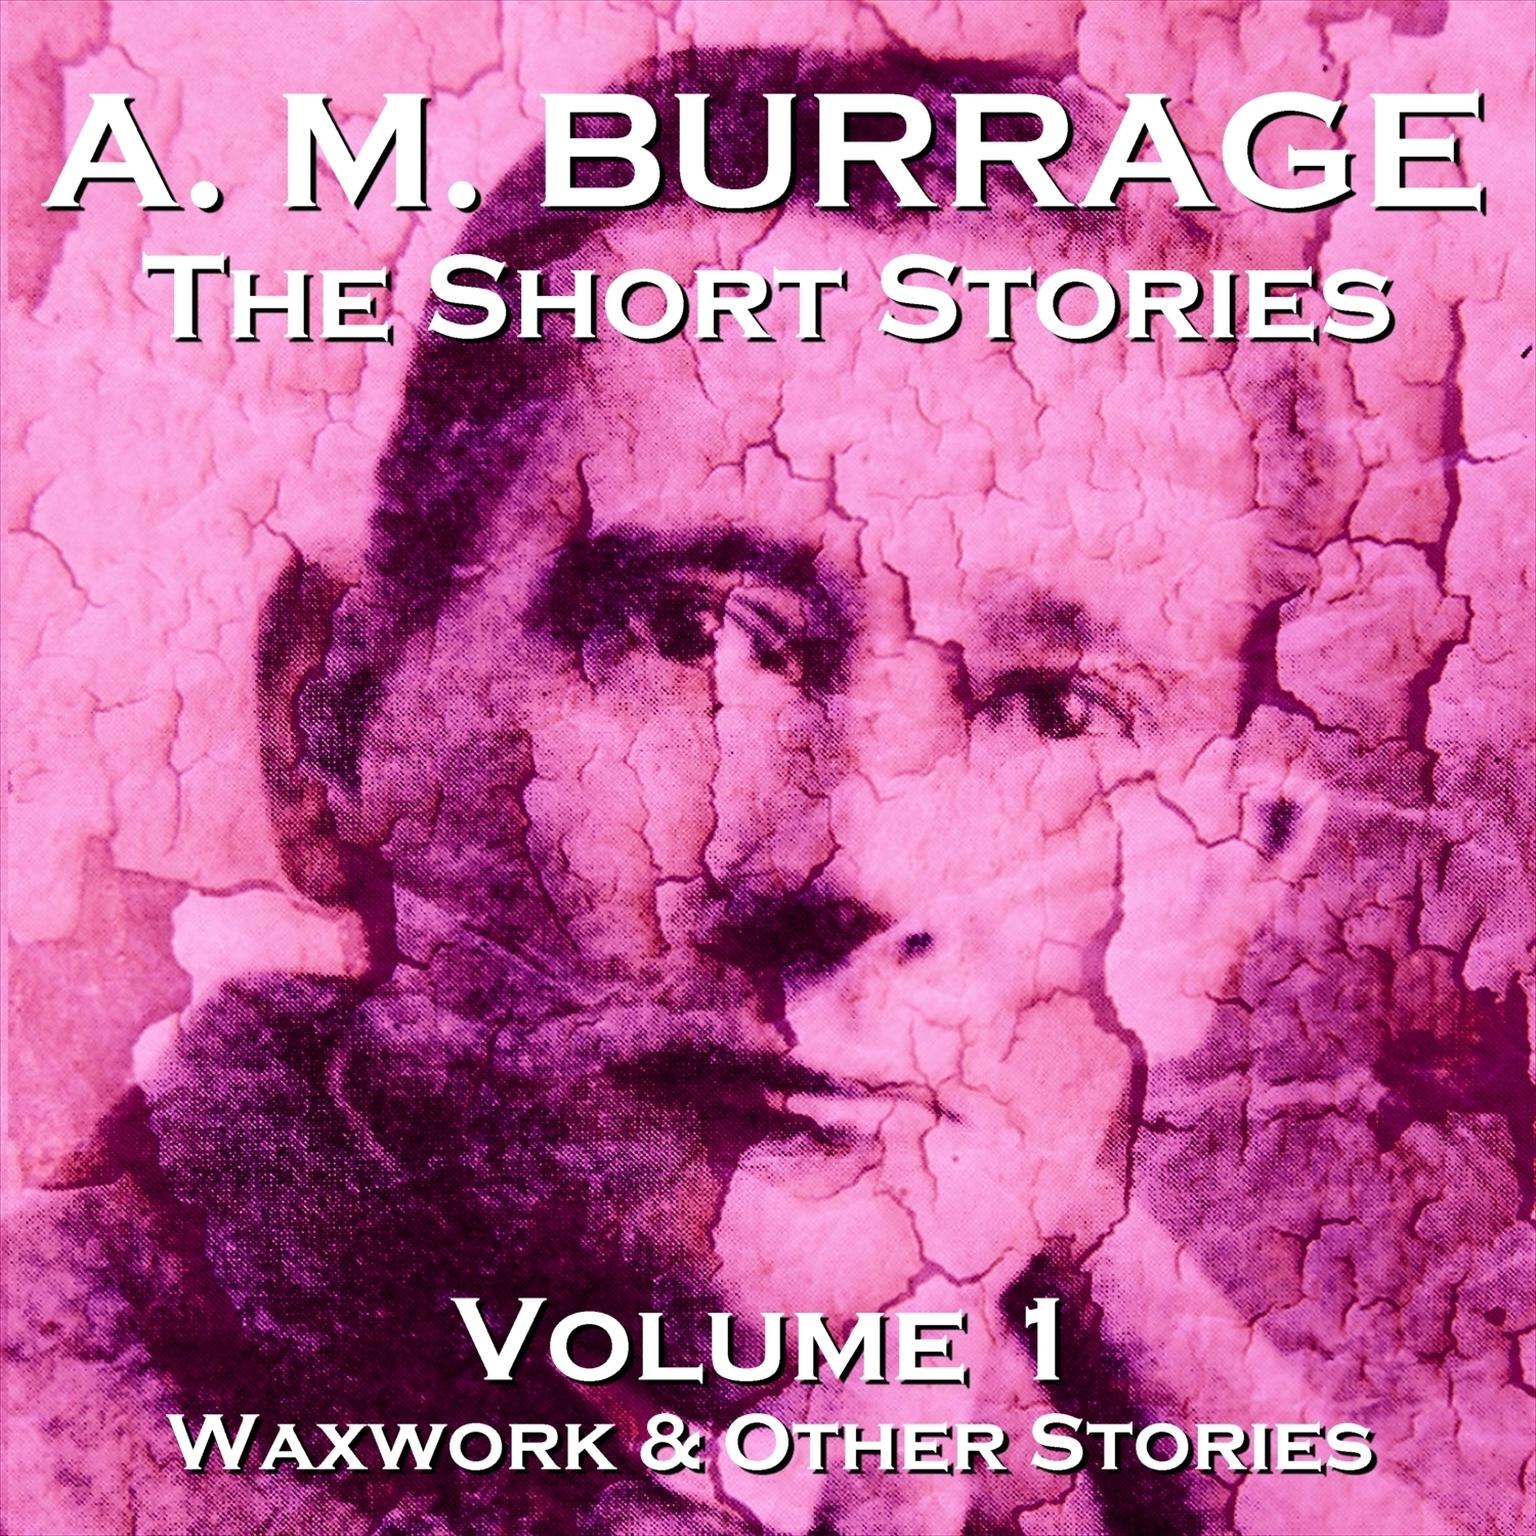 The Short Stories of A. M. Burrage: Volume 1: Waxwork and Other Stories Audiobook, by A. M. Burrage